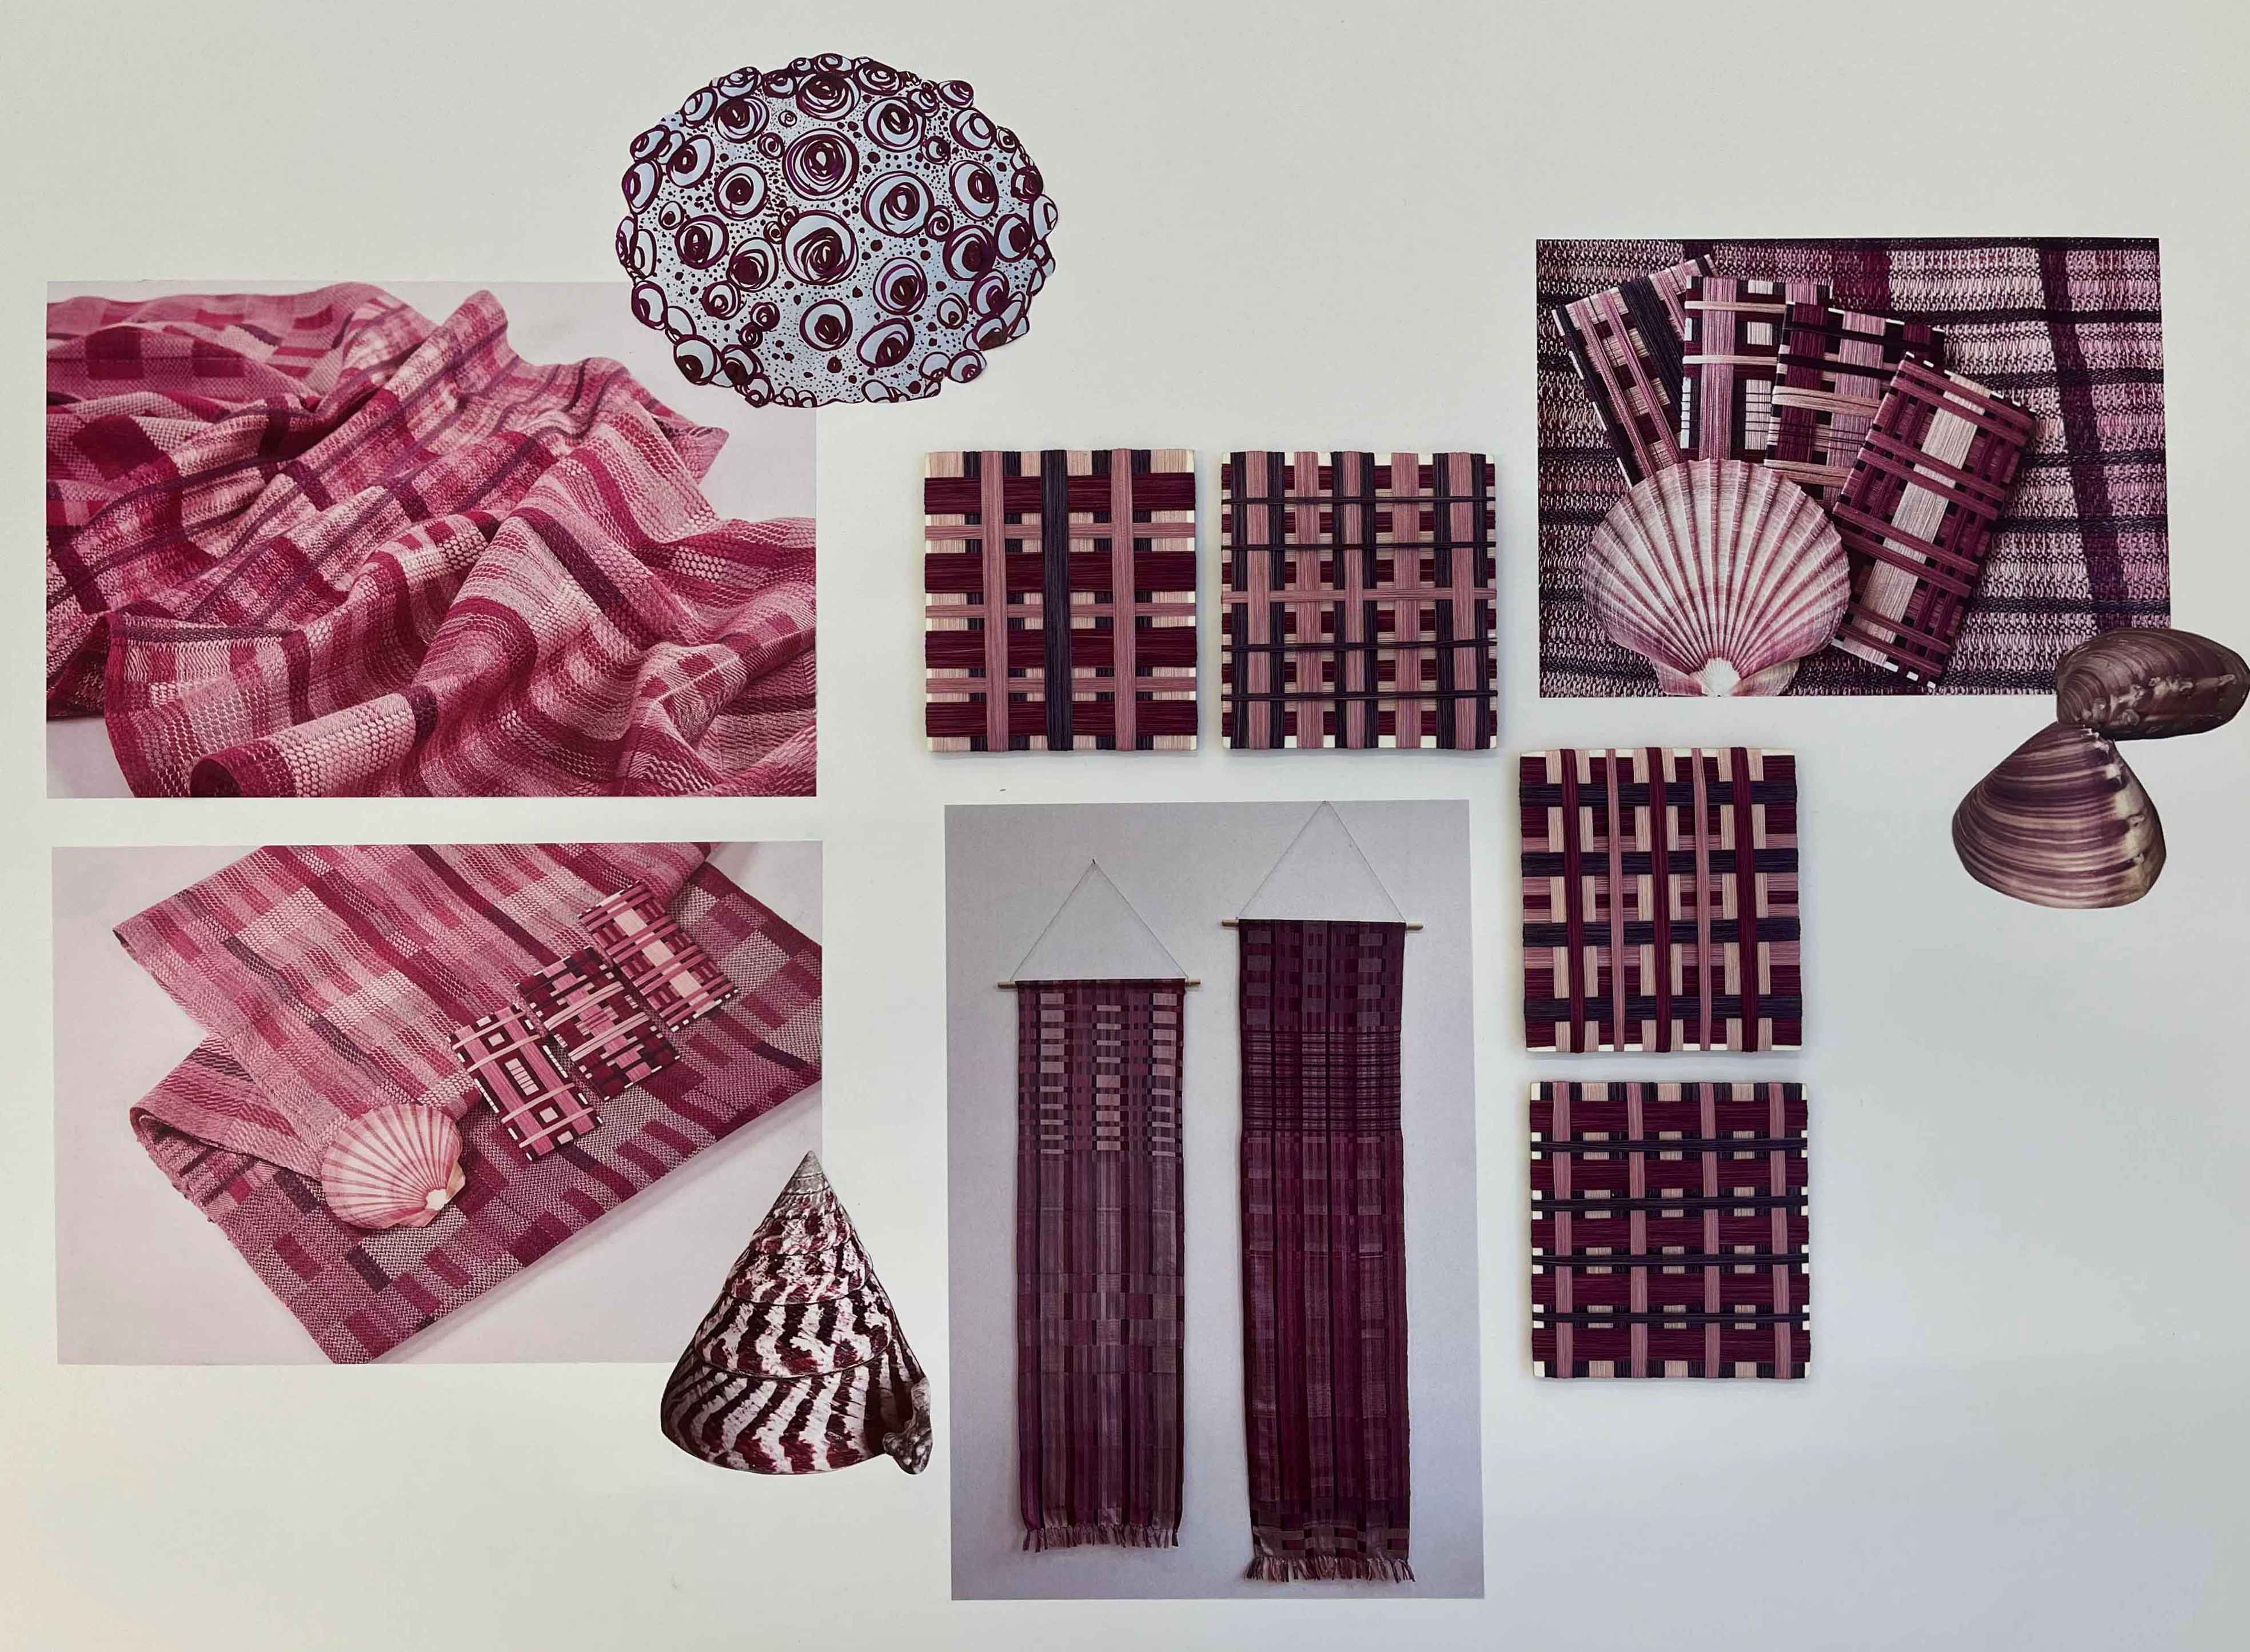 Collage showing drawing, shell image inspiration and yarn wraps. All purple and pink in colour.